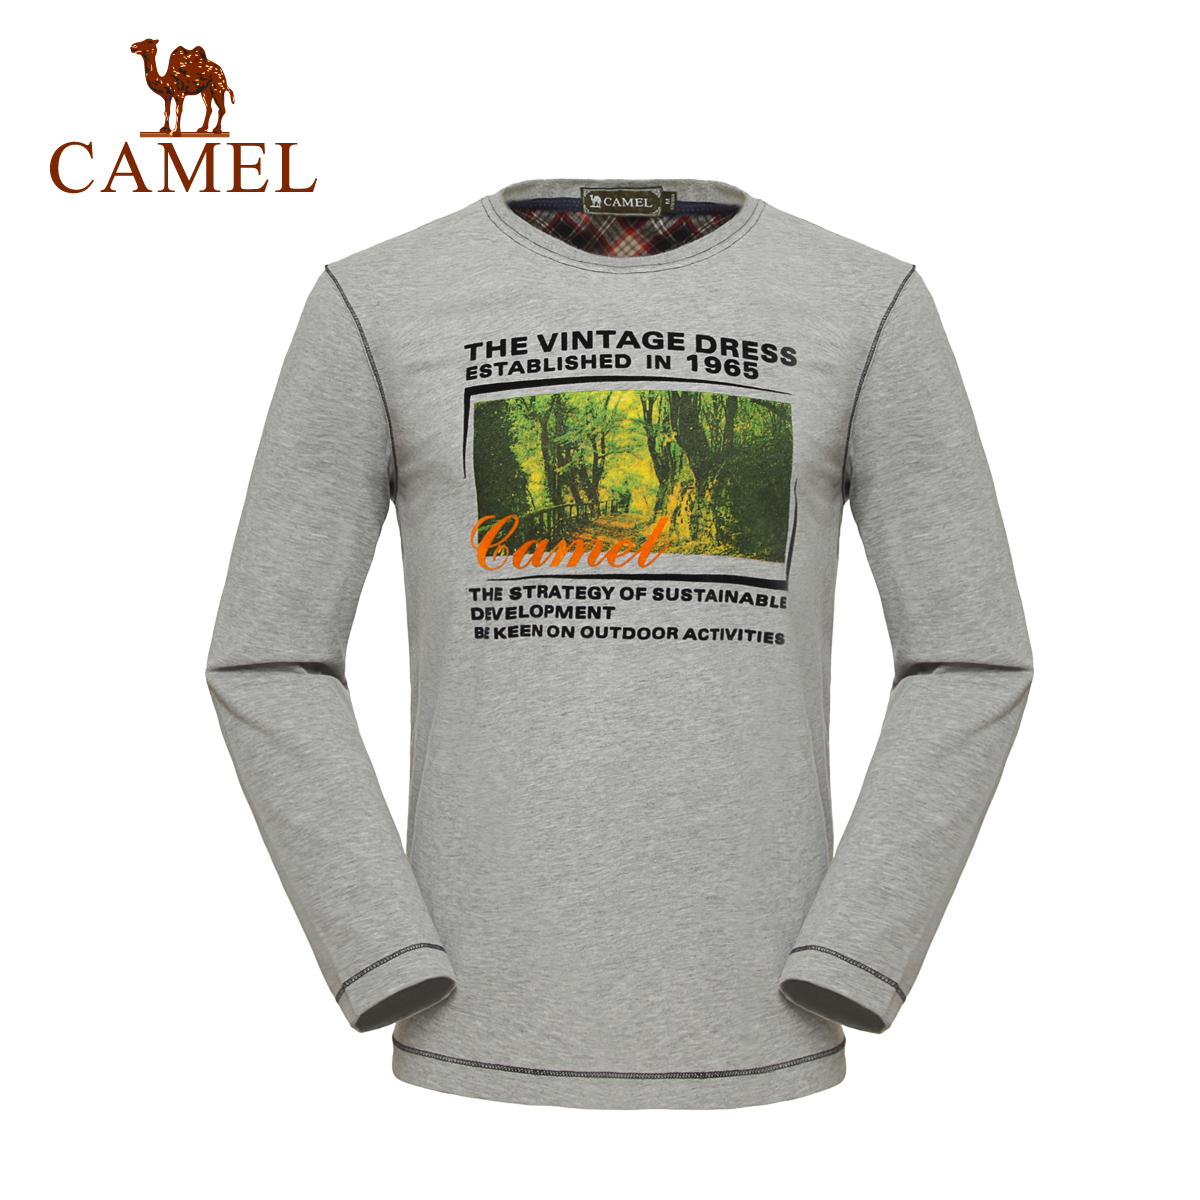 For camel outdoor casual clothing new arrival Men casual long-sleeve round neck T-shirt a4w232232